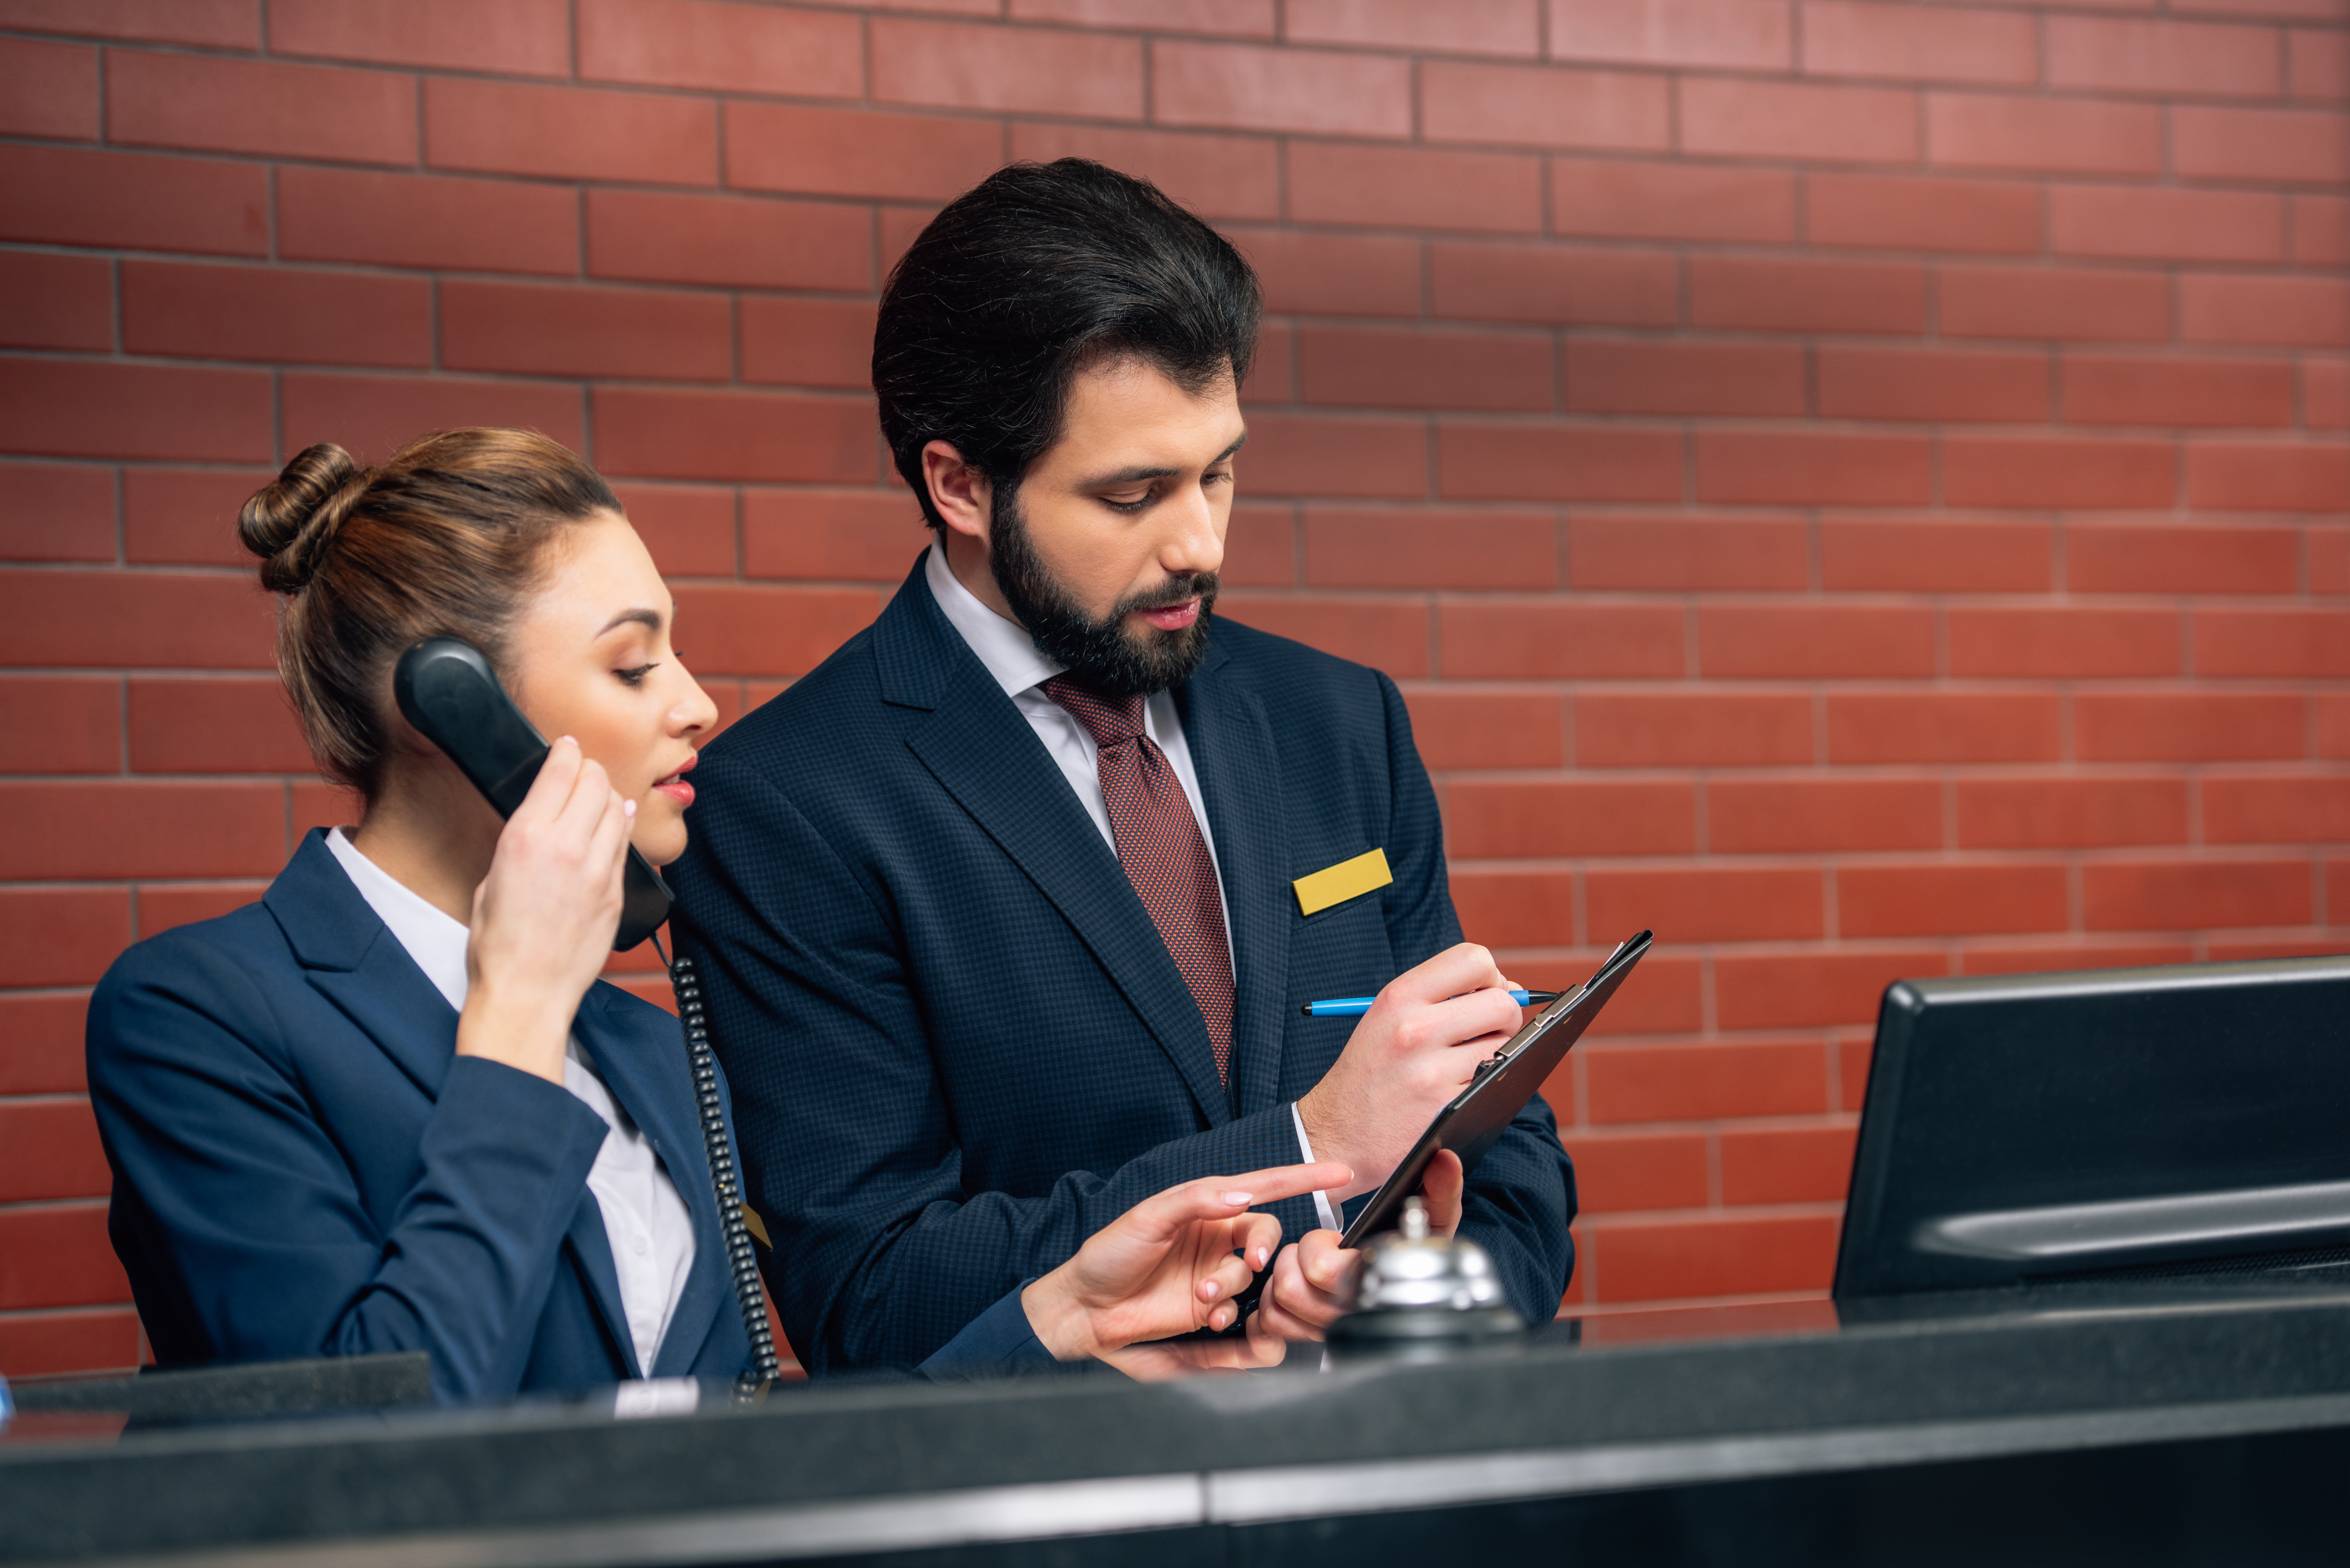 Concentrated hotel receptionists receiving call from customer at workplace. | Source: Shutterstock